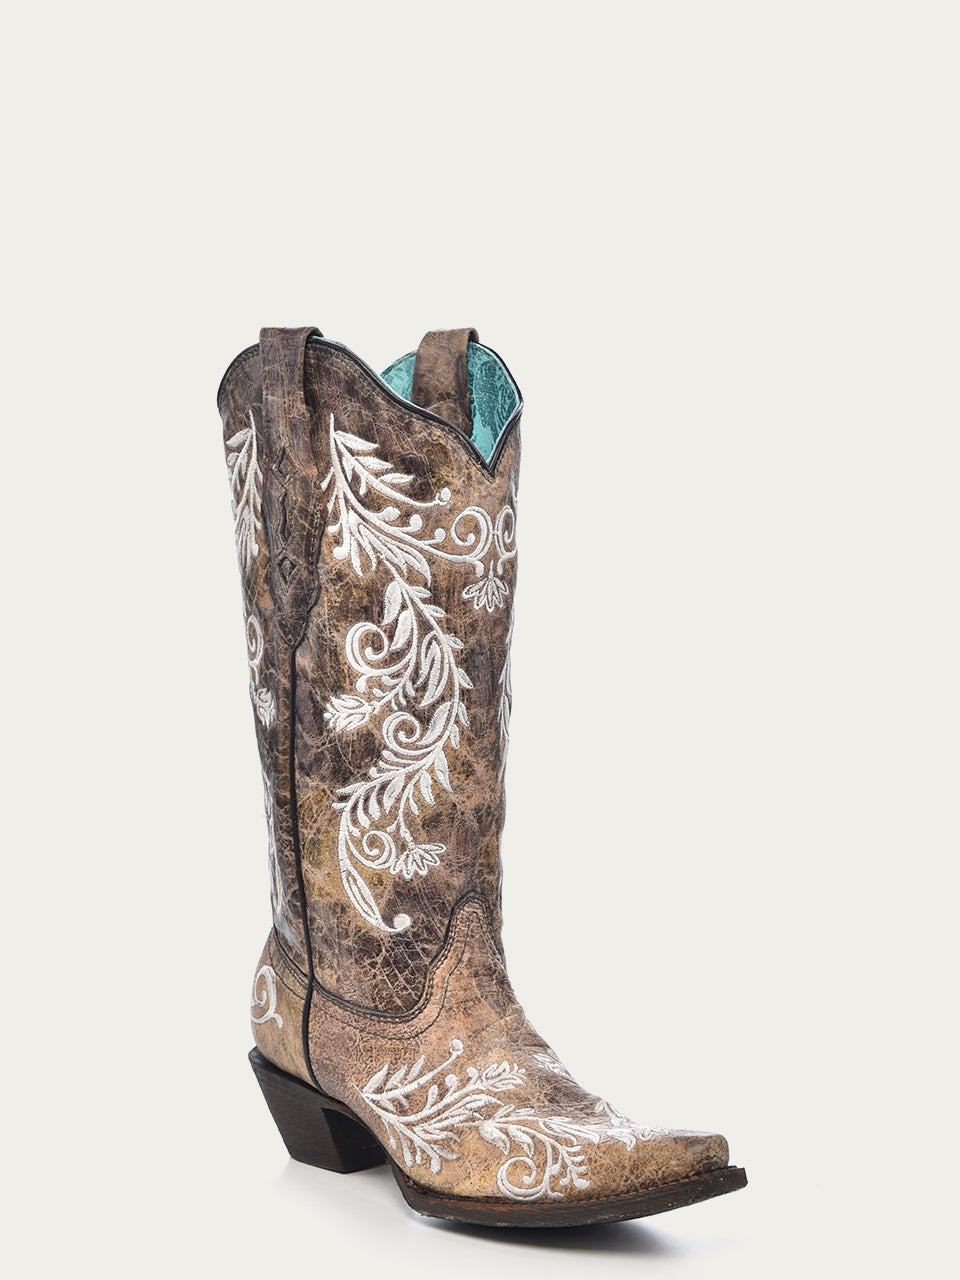 Corral Red Cowhide Cowgirl Boots - Snip Toe – Dallas Wayne Boot Company